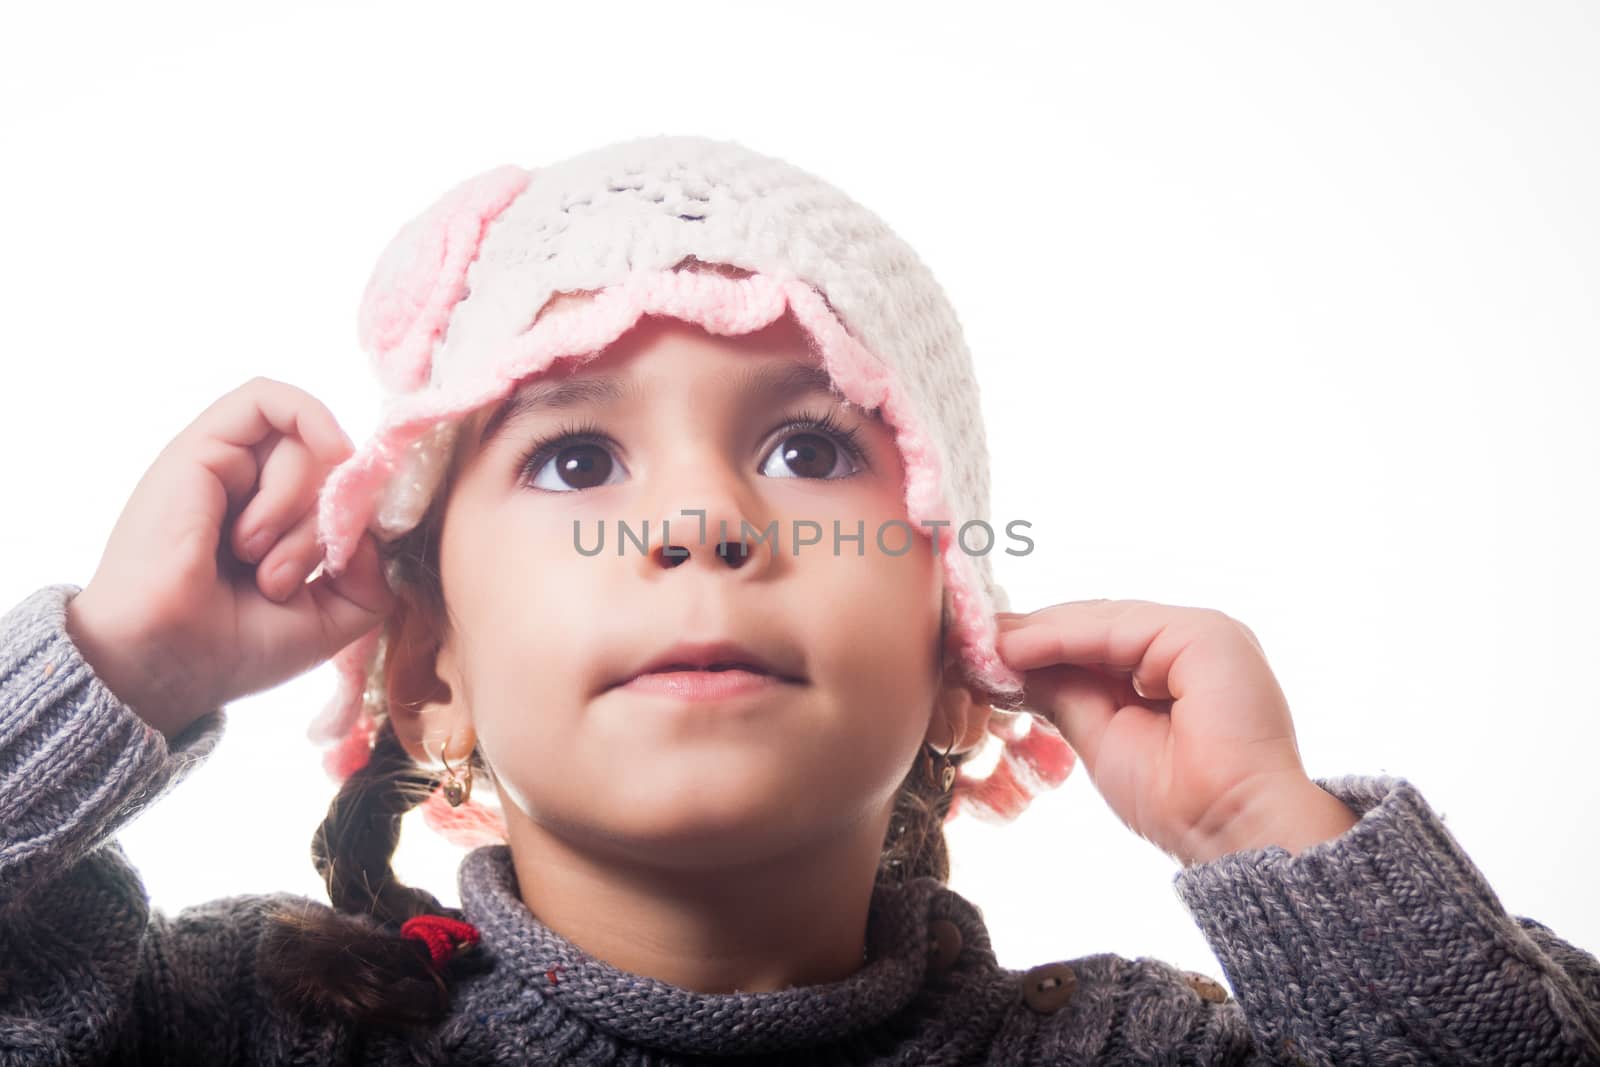 Girl arranging her knitted hat, on white background.